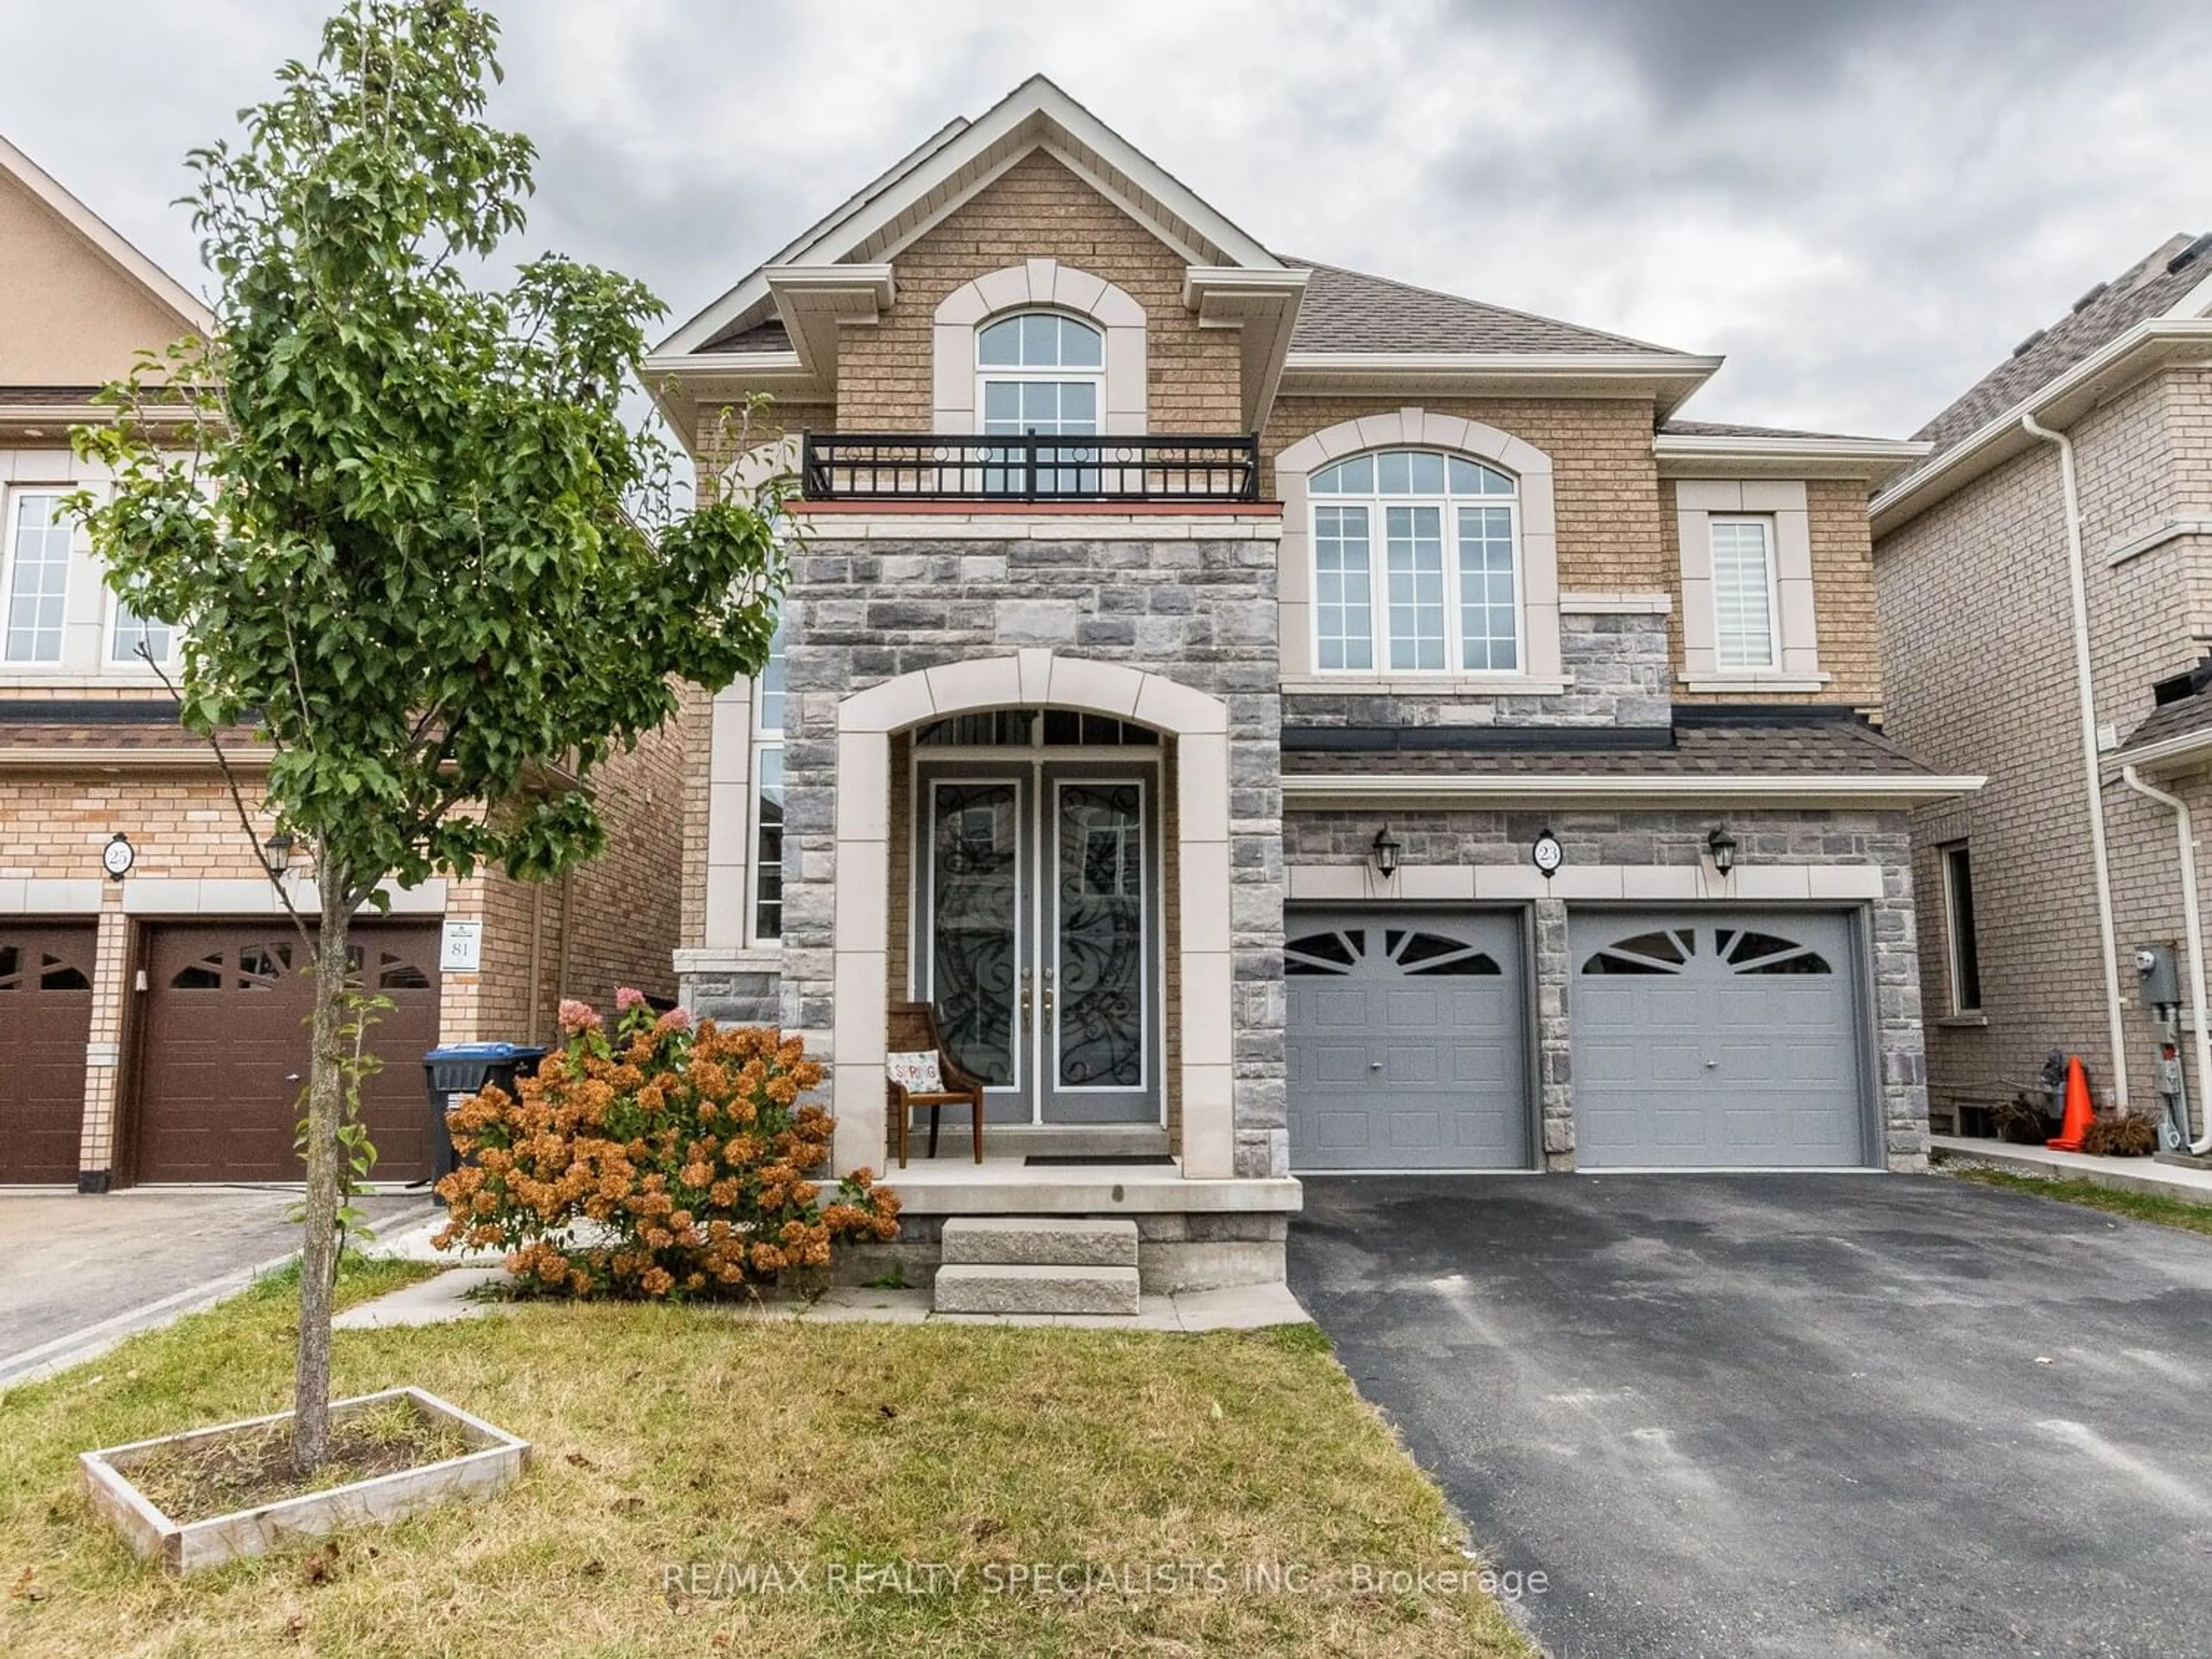 Home with brick exterior material for 23 Gambia Rd, Brampton Ontario L7A 4M2